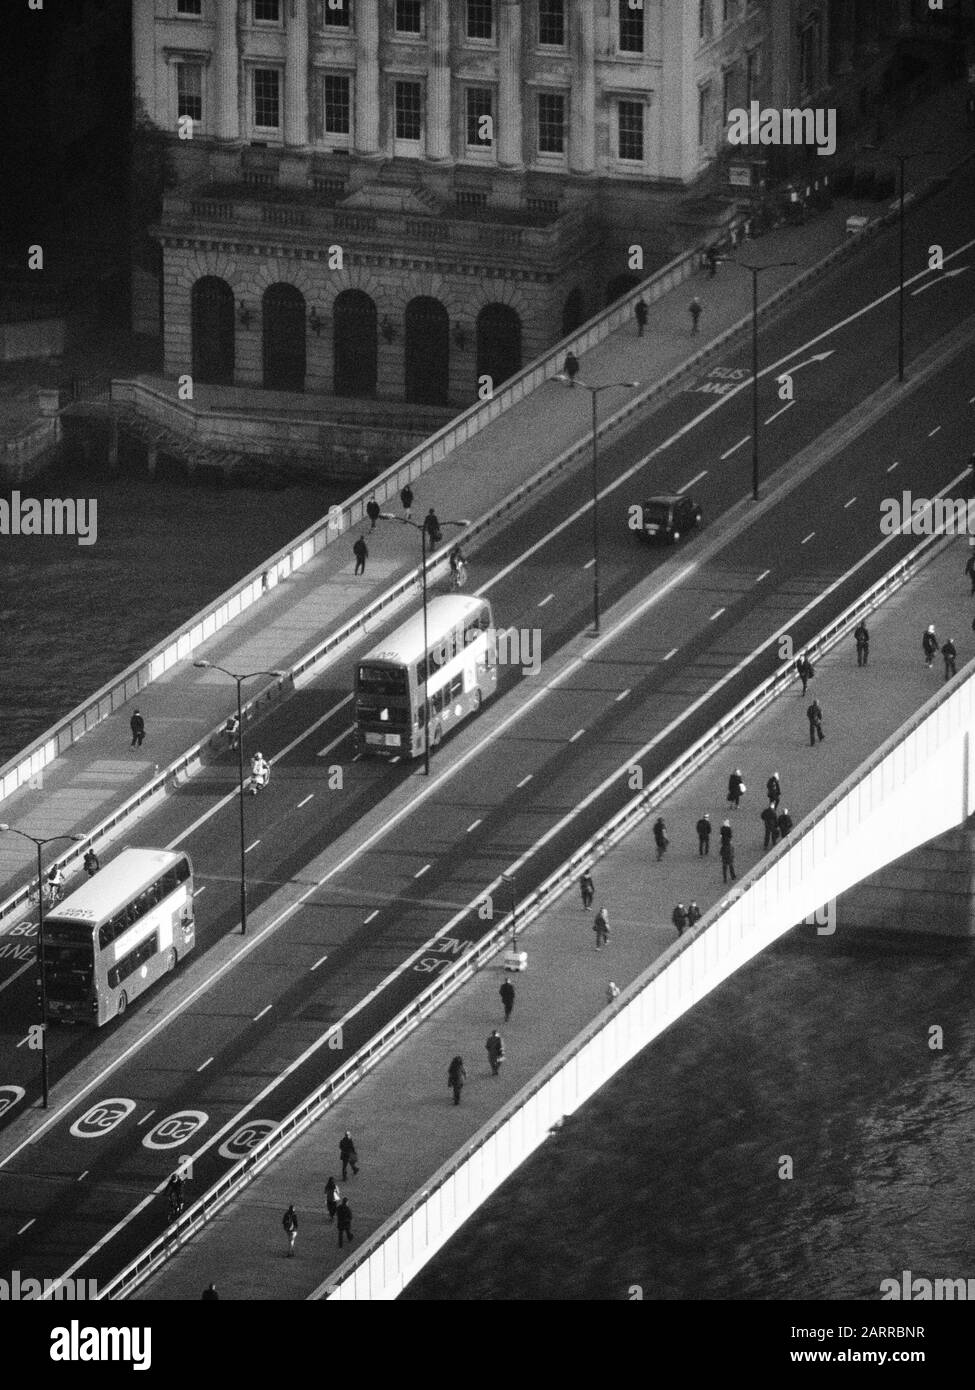 a view looking down onto London Bridge in black and white showing early morning traffic and pedestrians crossing Stock Photo